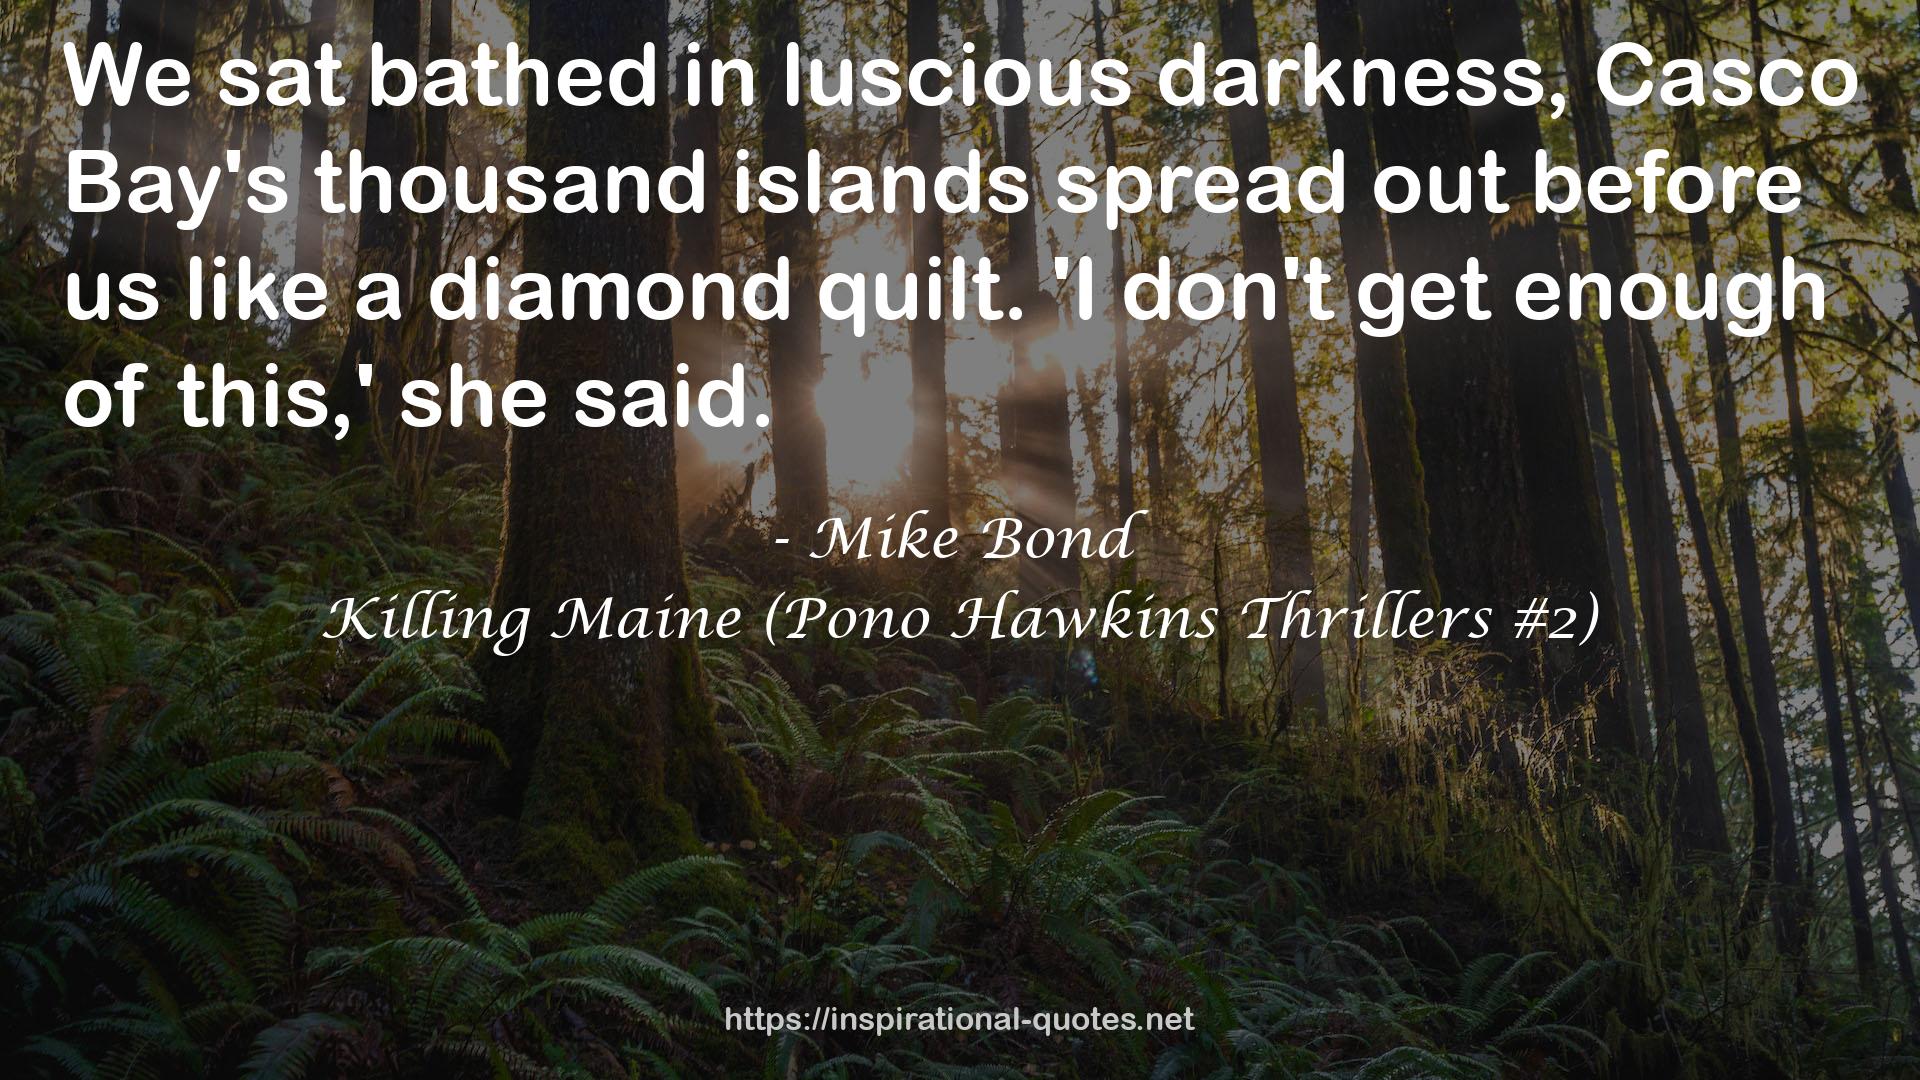 Casco Bay's thousand islands  QUOTES